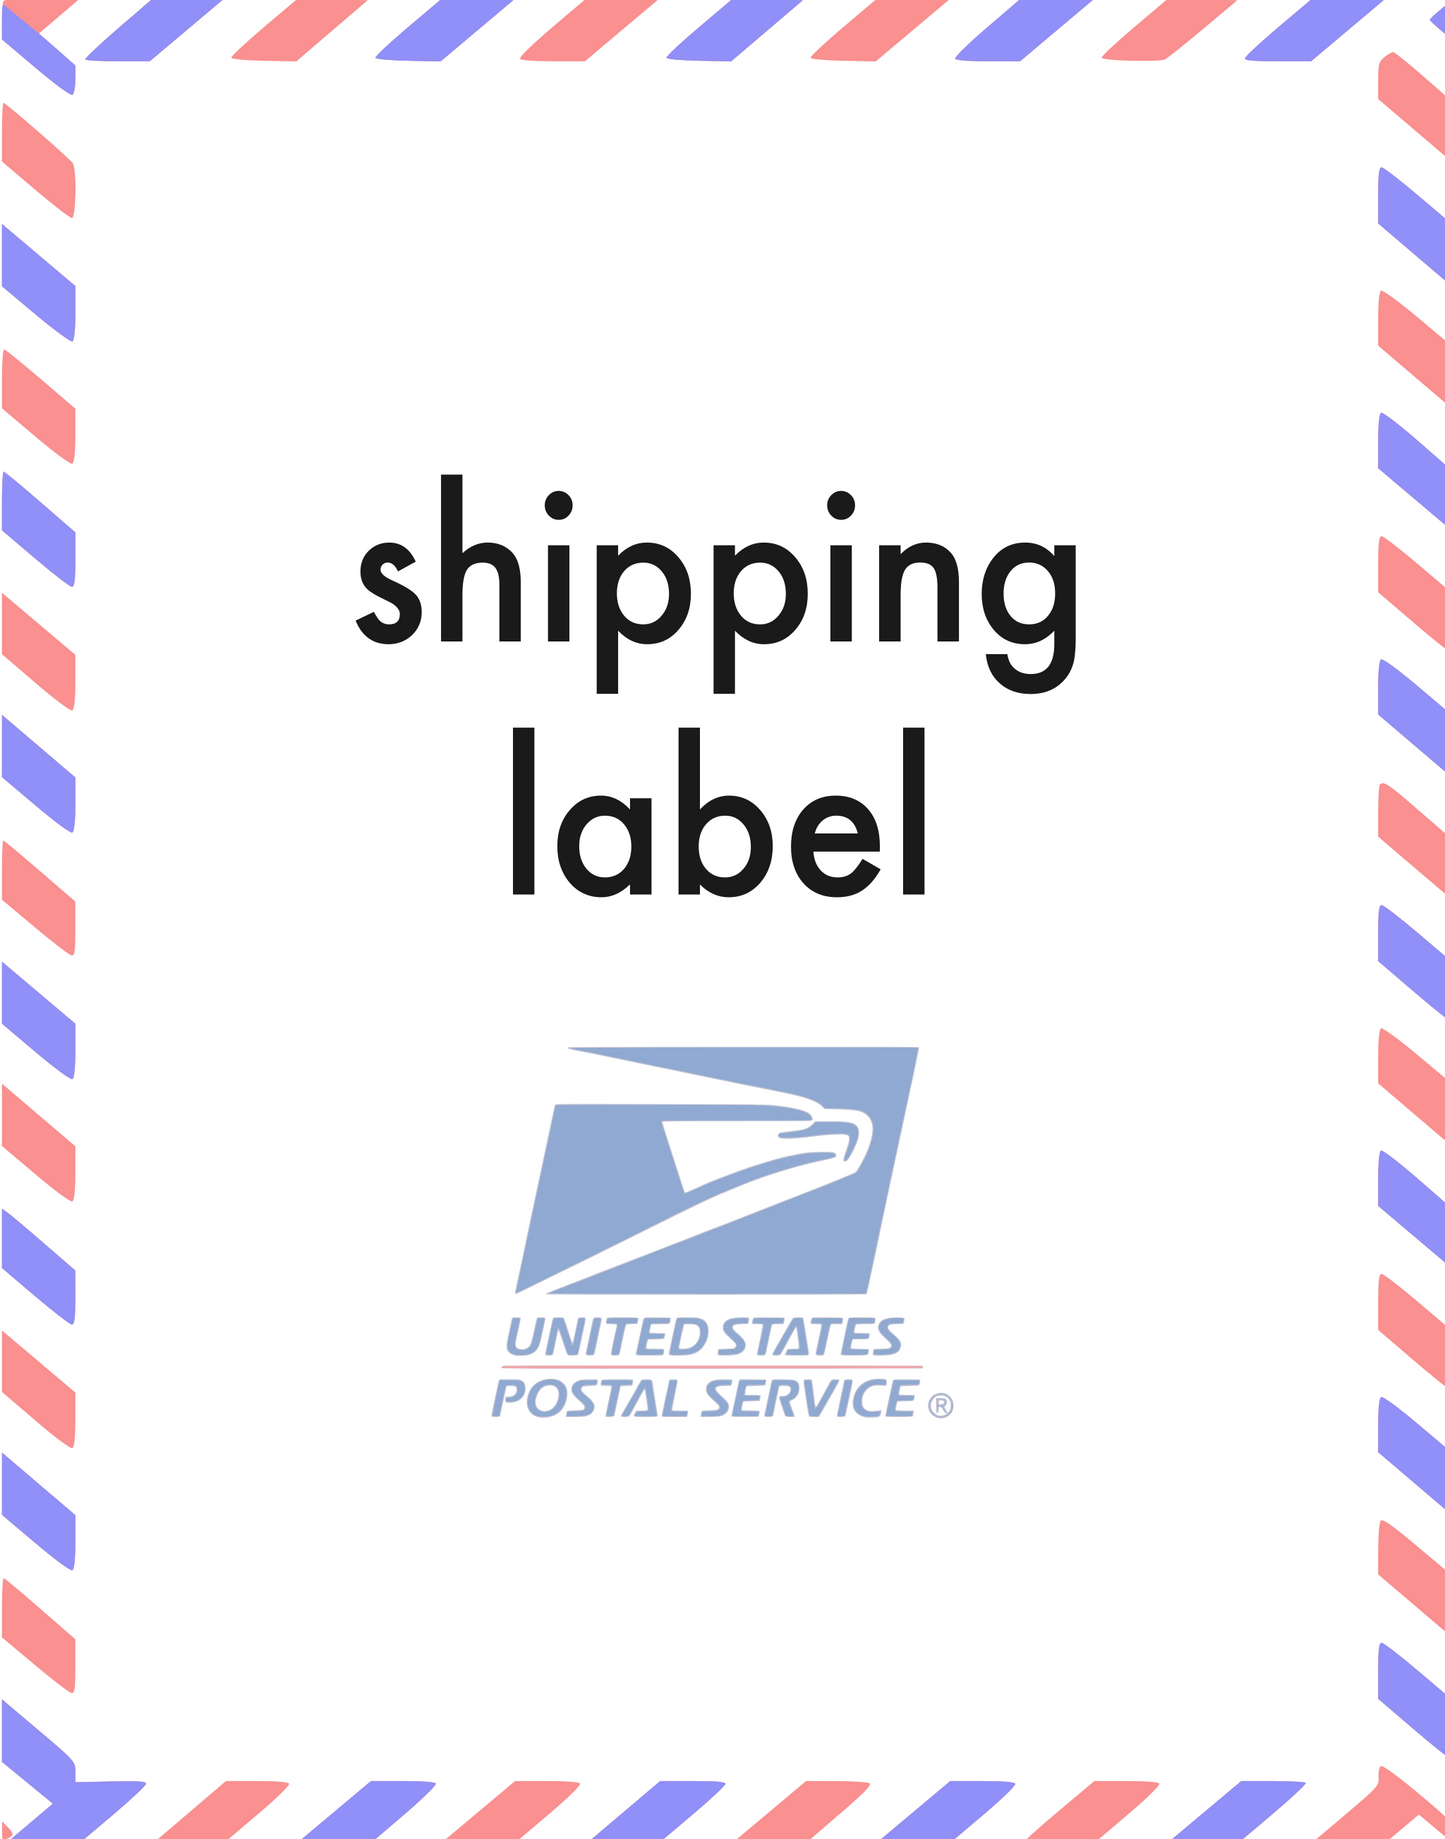 Shipping label for new item (under 12 oz.)